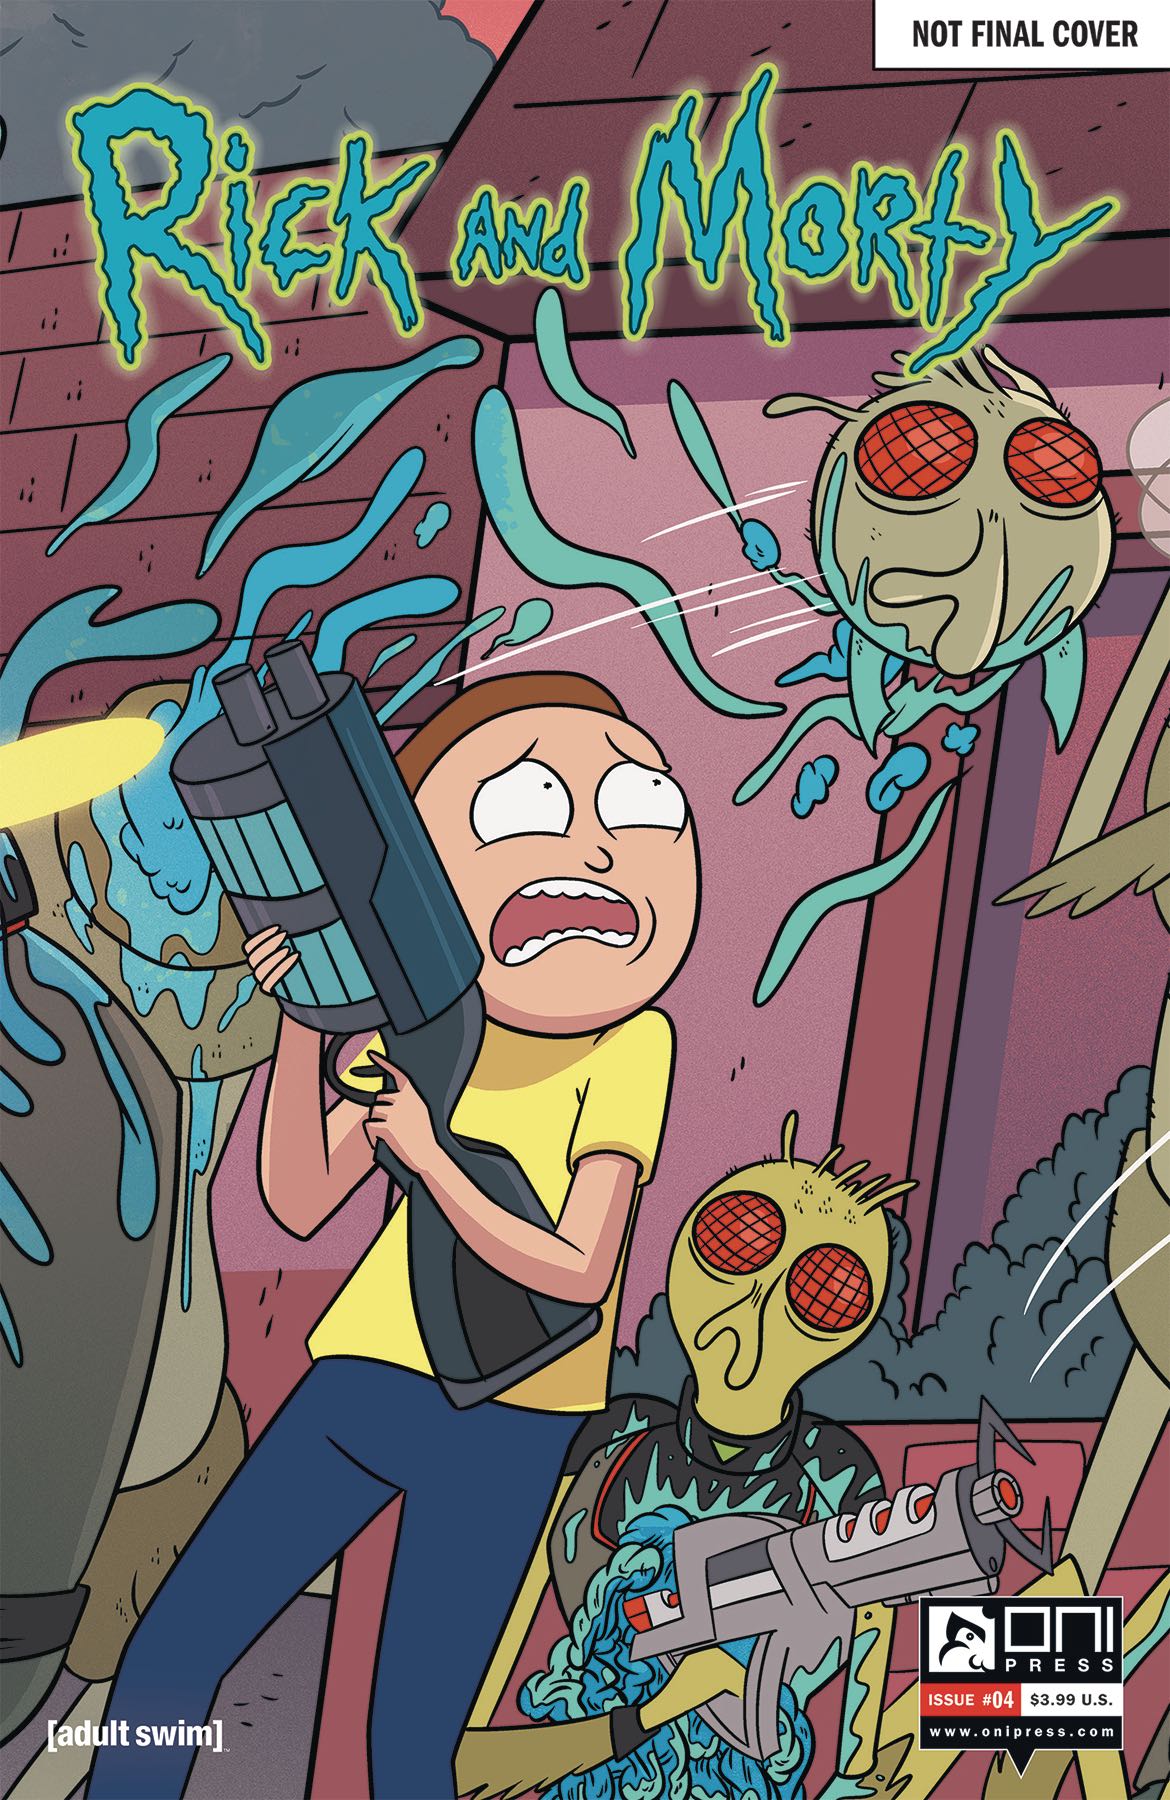 Rick and Morty #4 (50 Issues Special Cover) | Fresh Comics